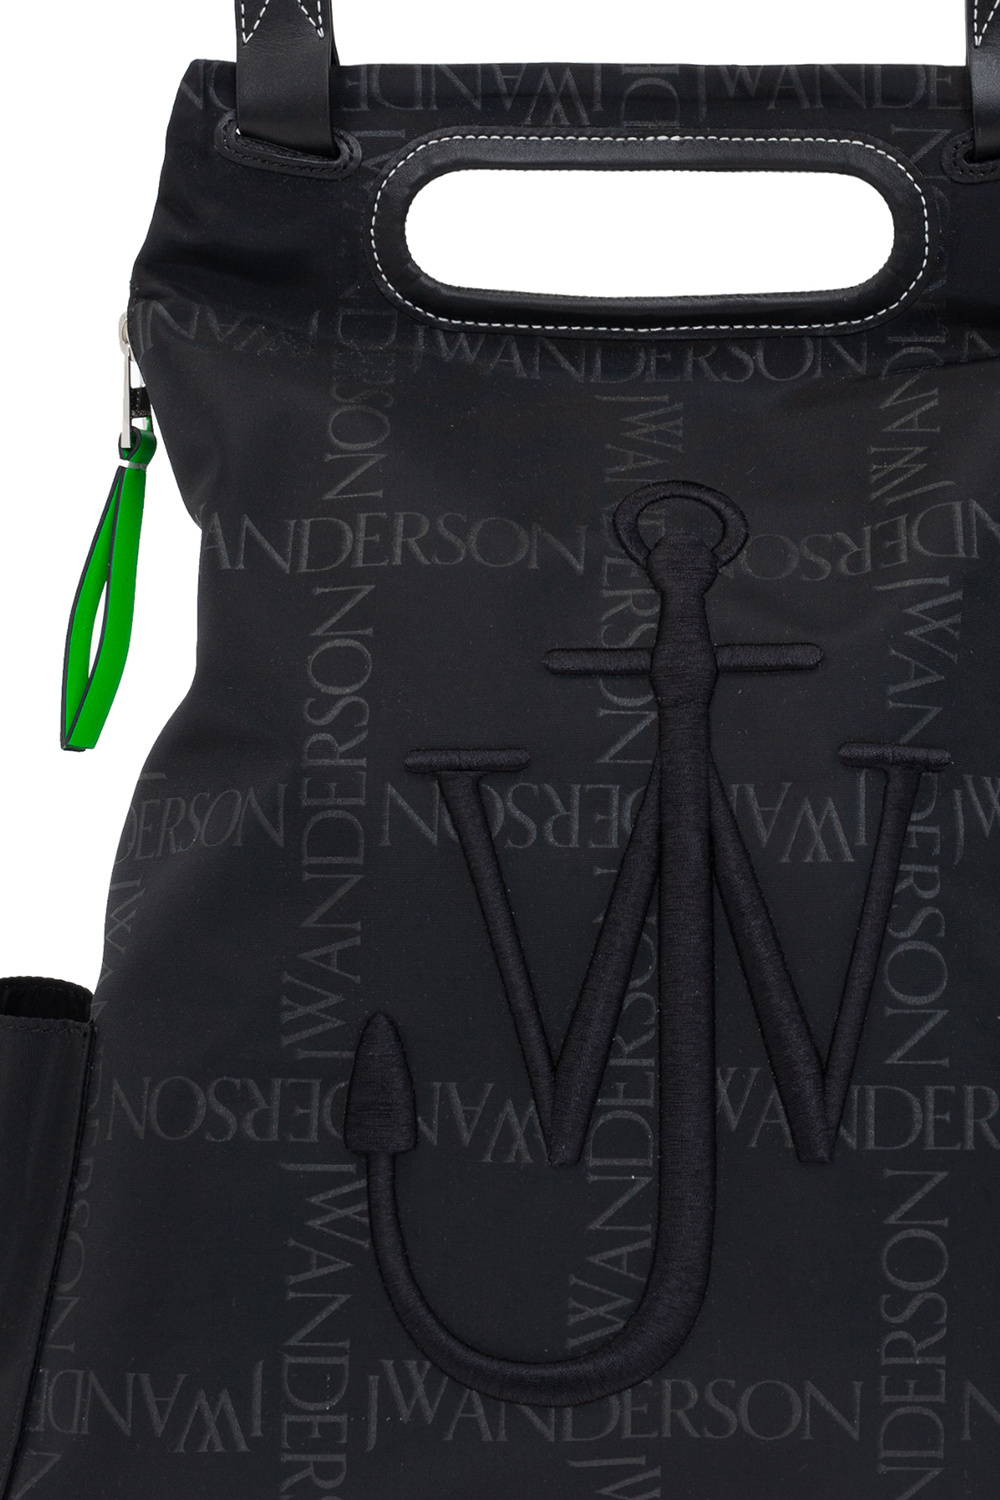 JW Anderson ‘Anchor’ backpack